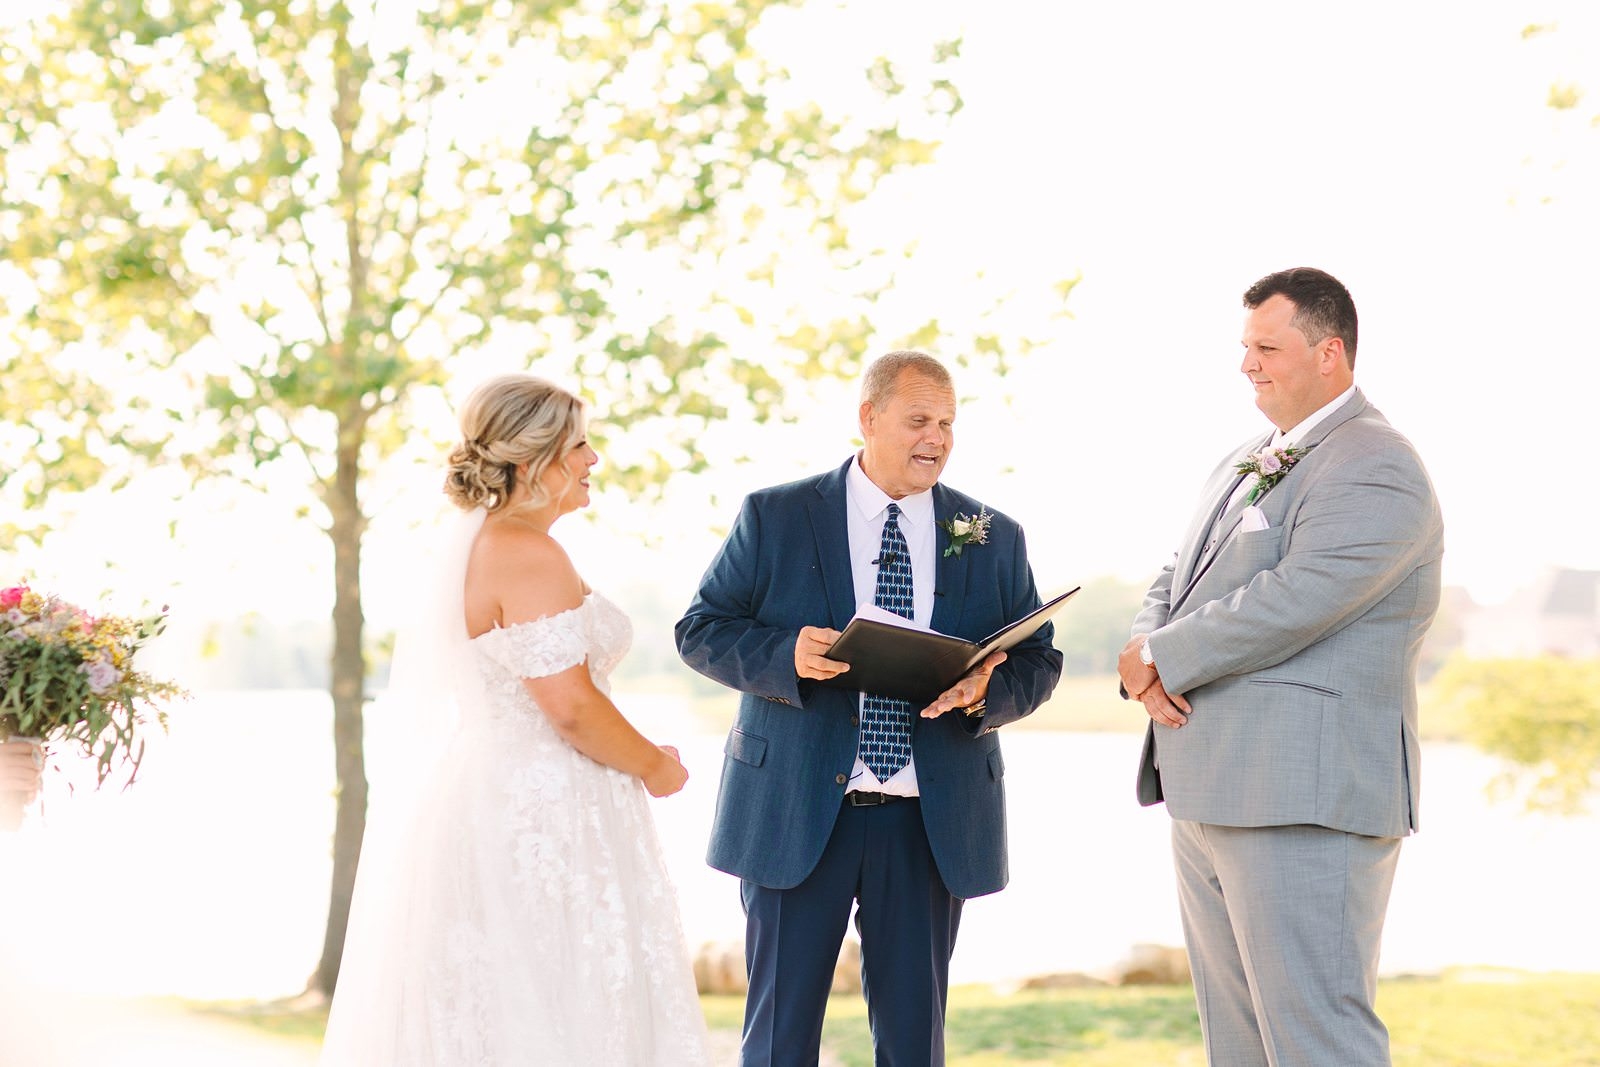 A Sunny Summer Wedding at Friedman Park in Newburgh Indiana | Paige and Dylan | Bret and Brandie Photography132.jpg